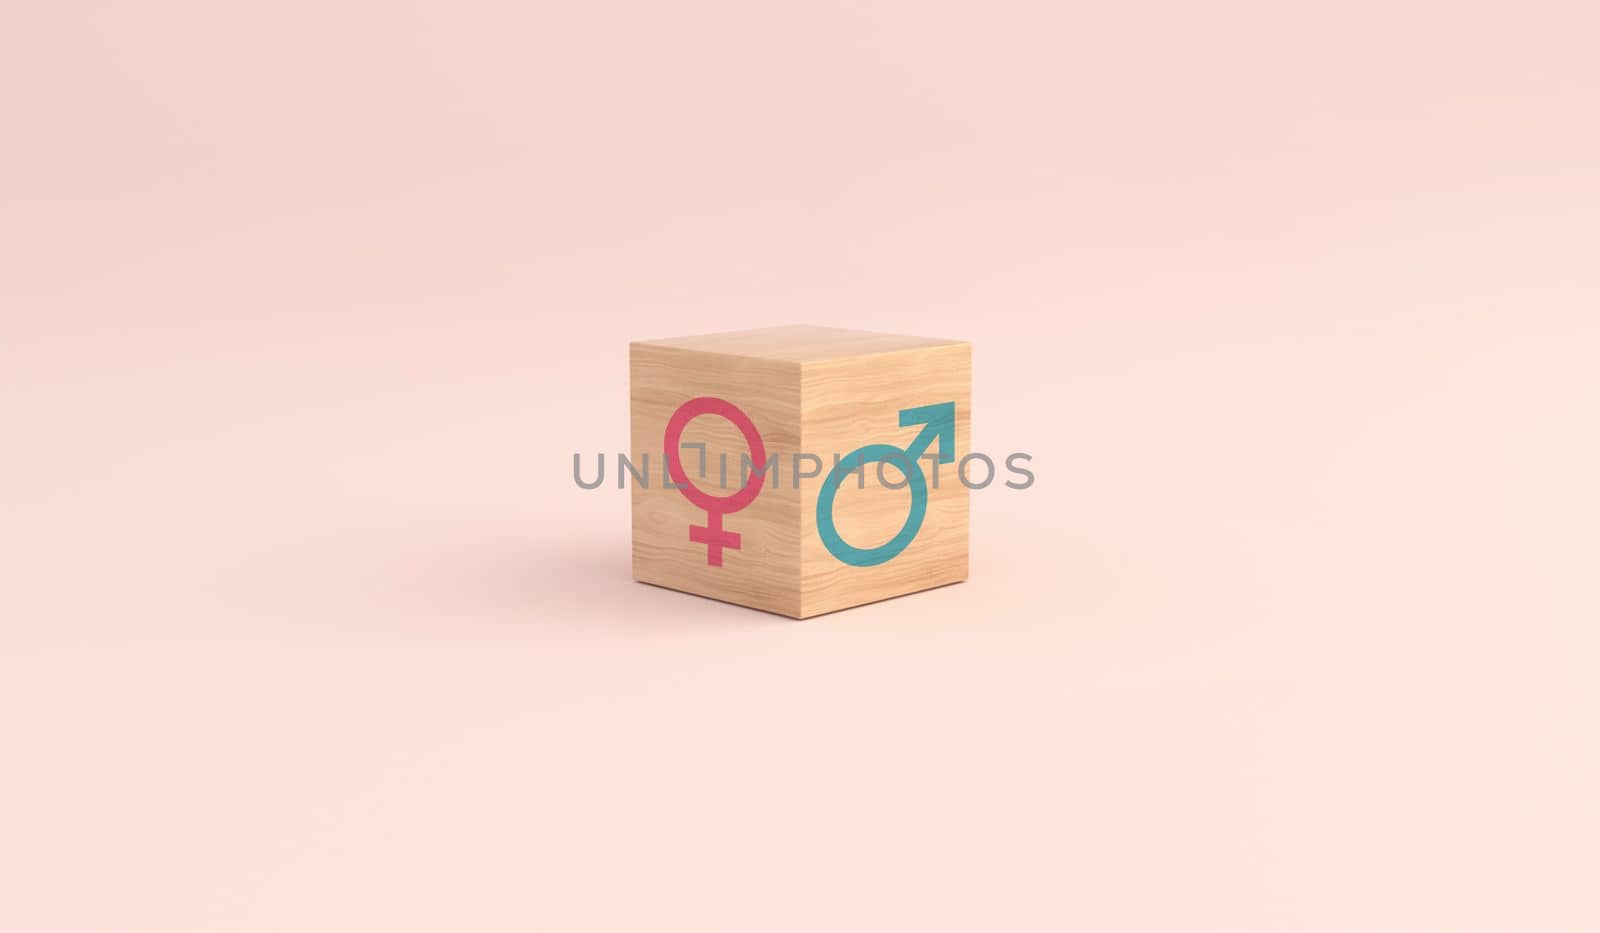 Male and female gender icons against pink background. Gender equality concept. by ImagesRouges